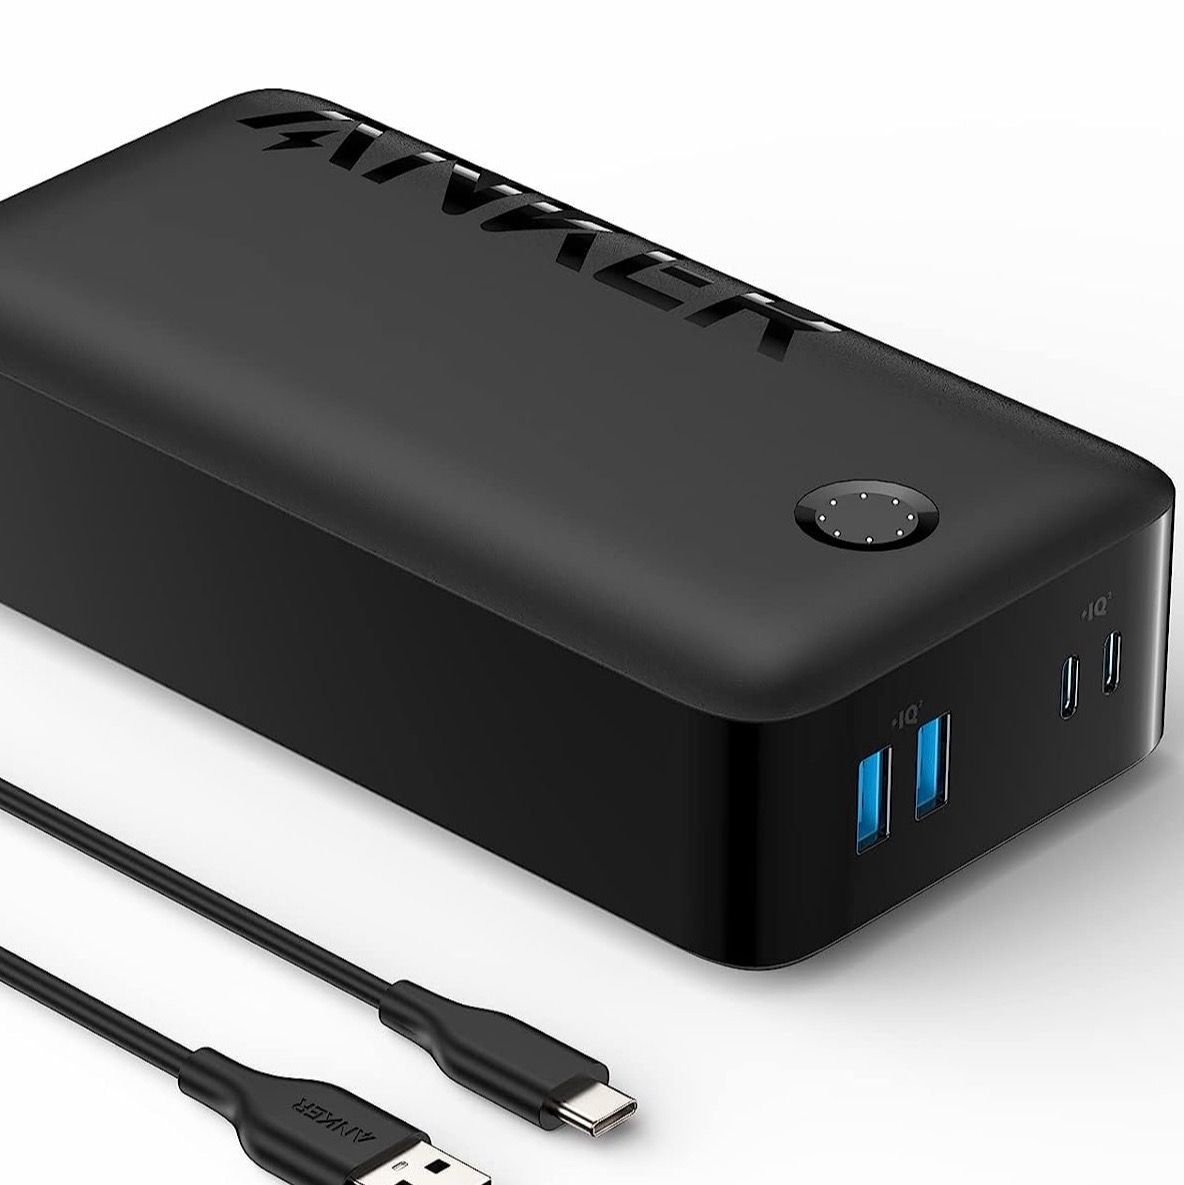 This Prime Day deal on Anker's 347 power bank is still up for grabs